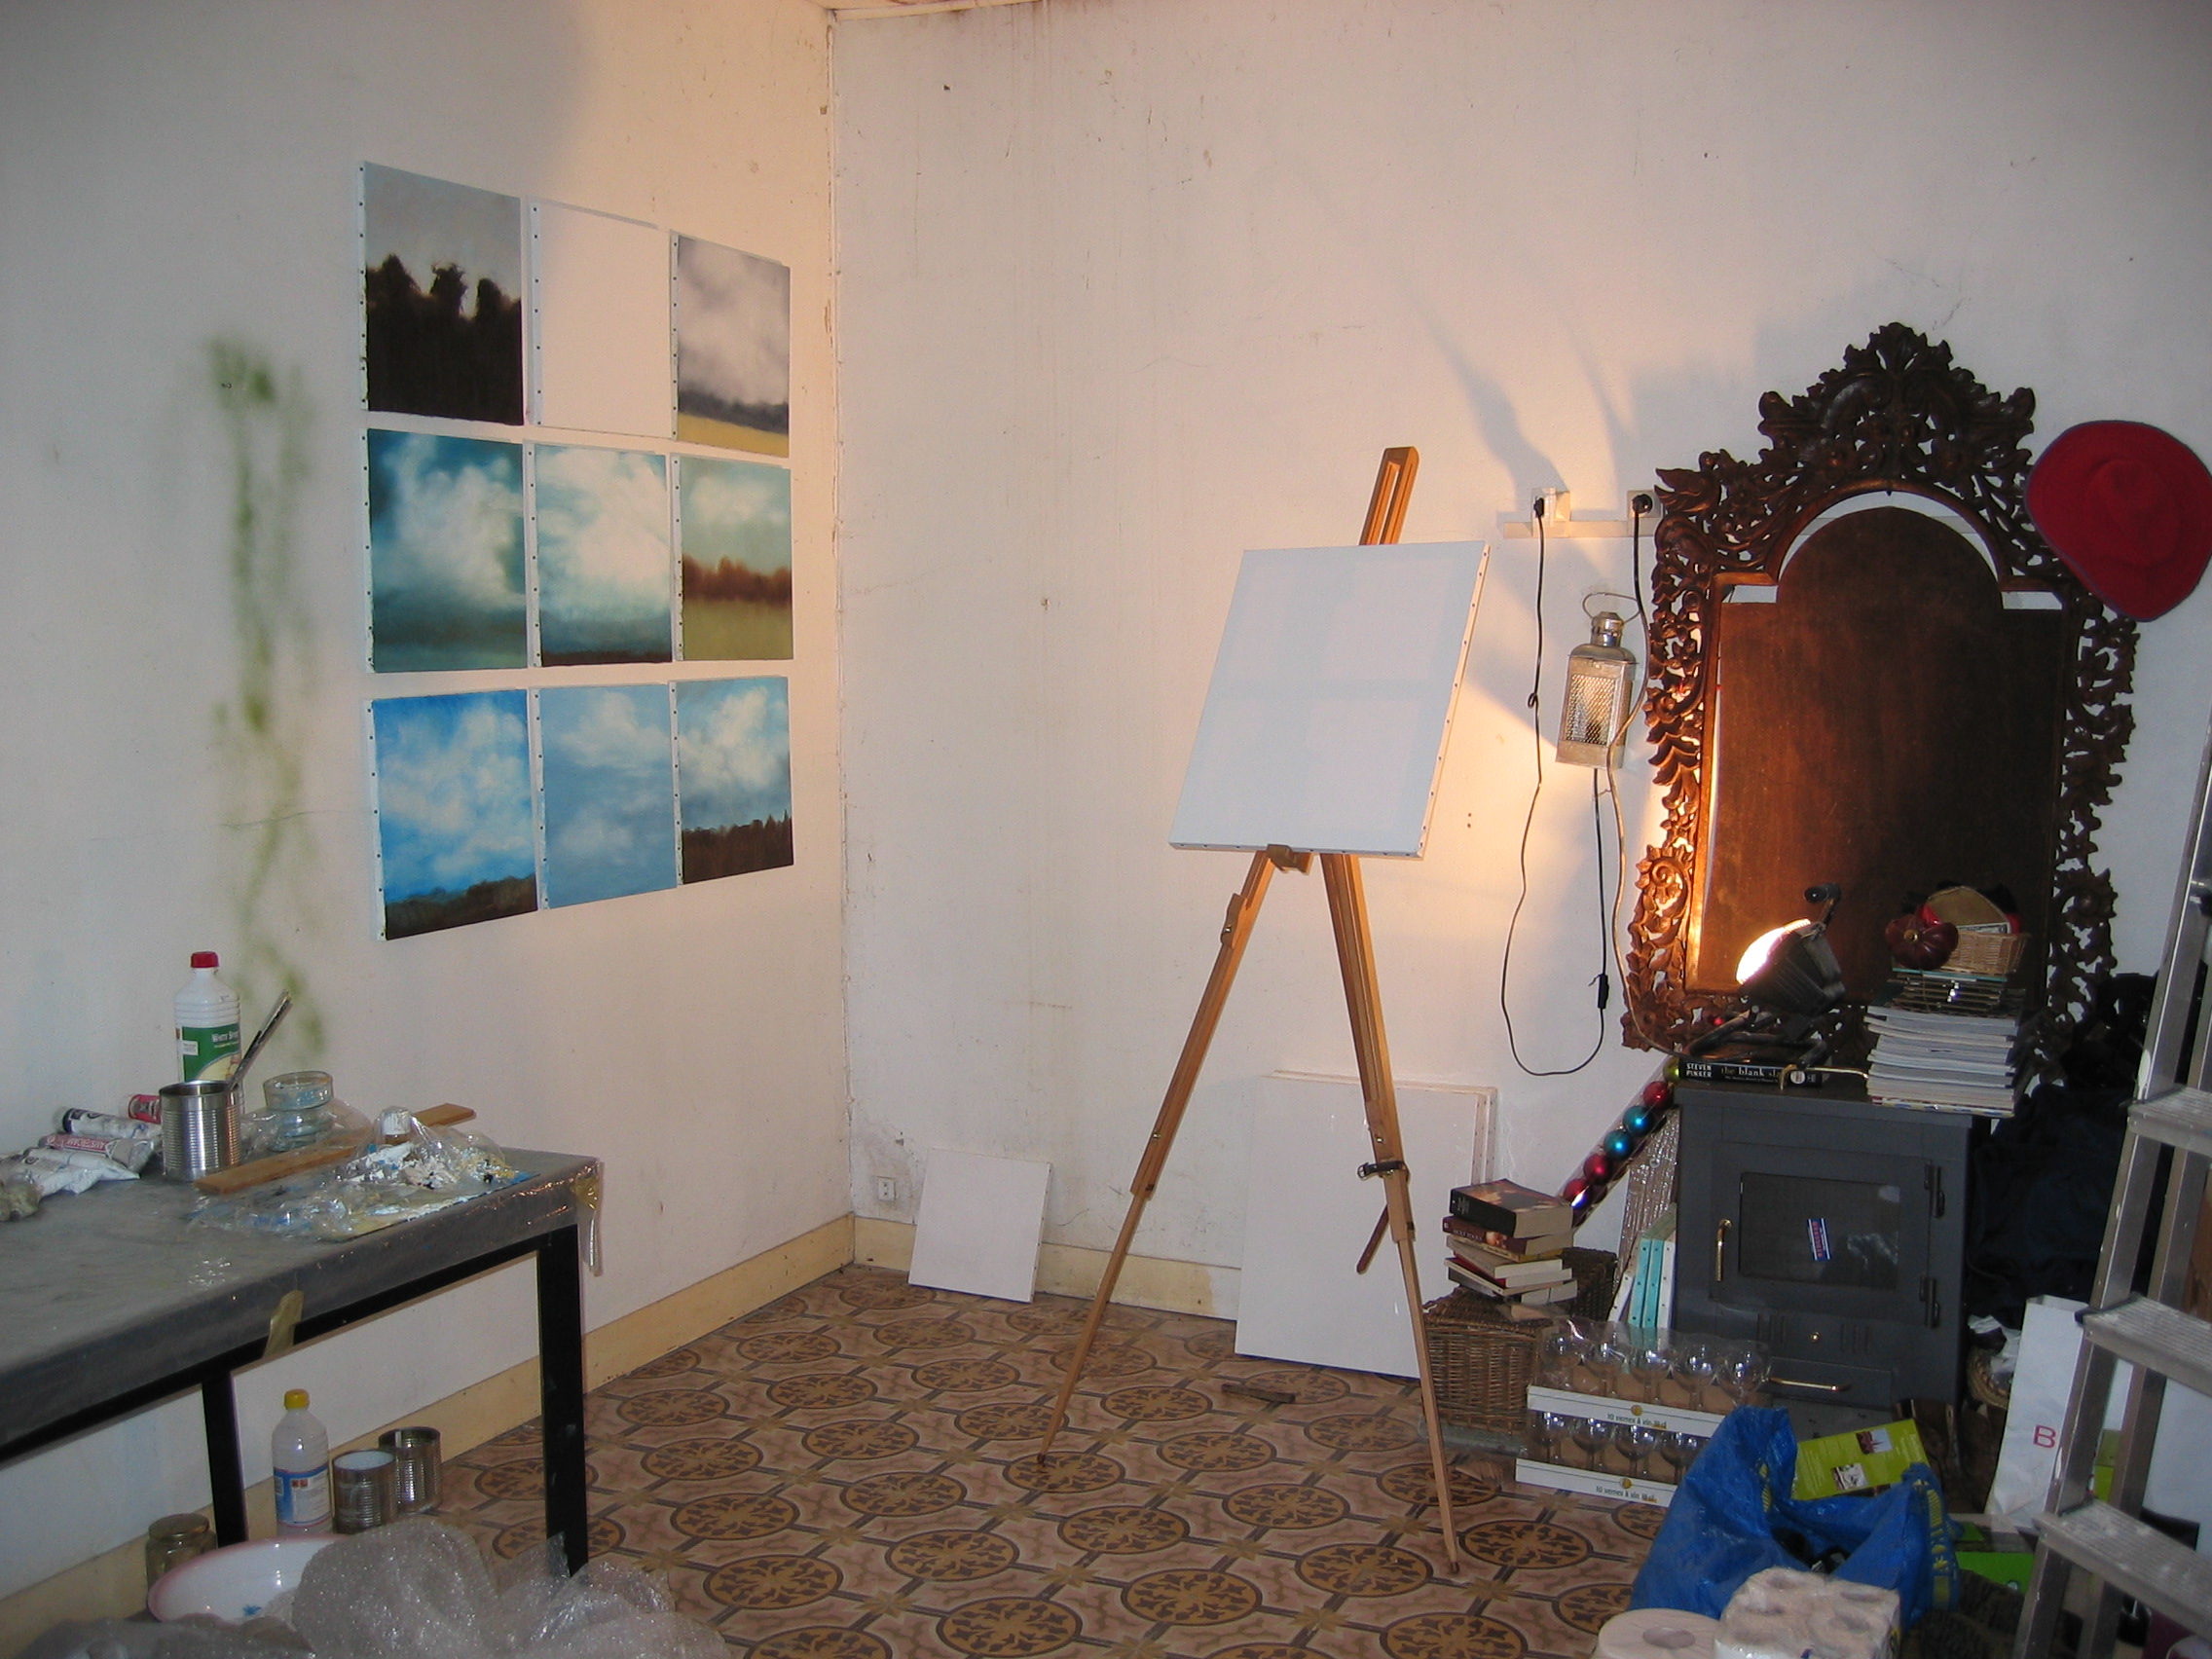 Working in the studio in Septeuil.